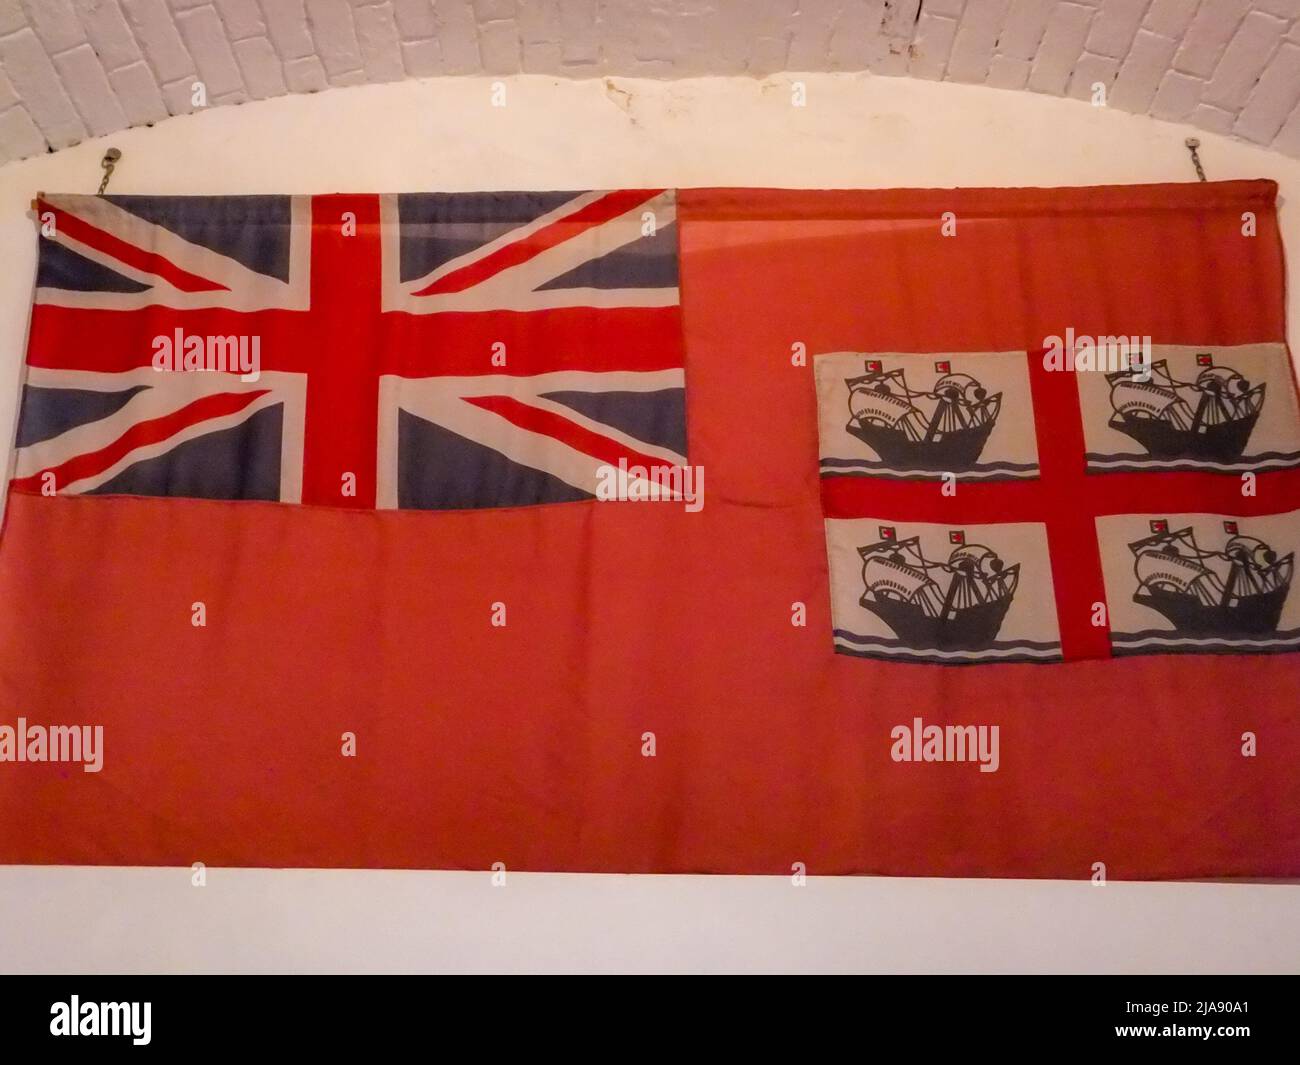 A British 'red ensign' flag defaced with four ships is on display at Hurst Castle in Milford-on-Sea, Hampshire, England, UK. Stock Photo